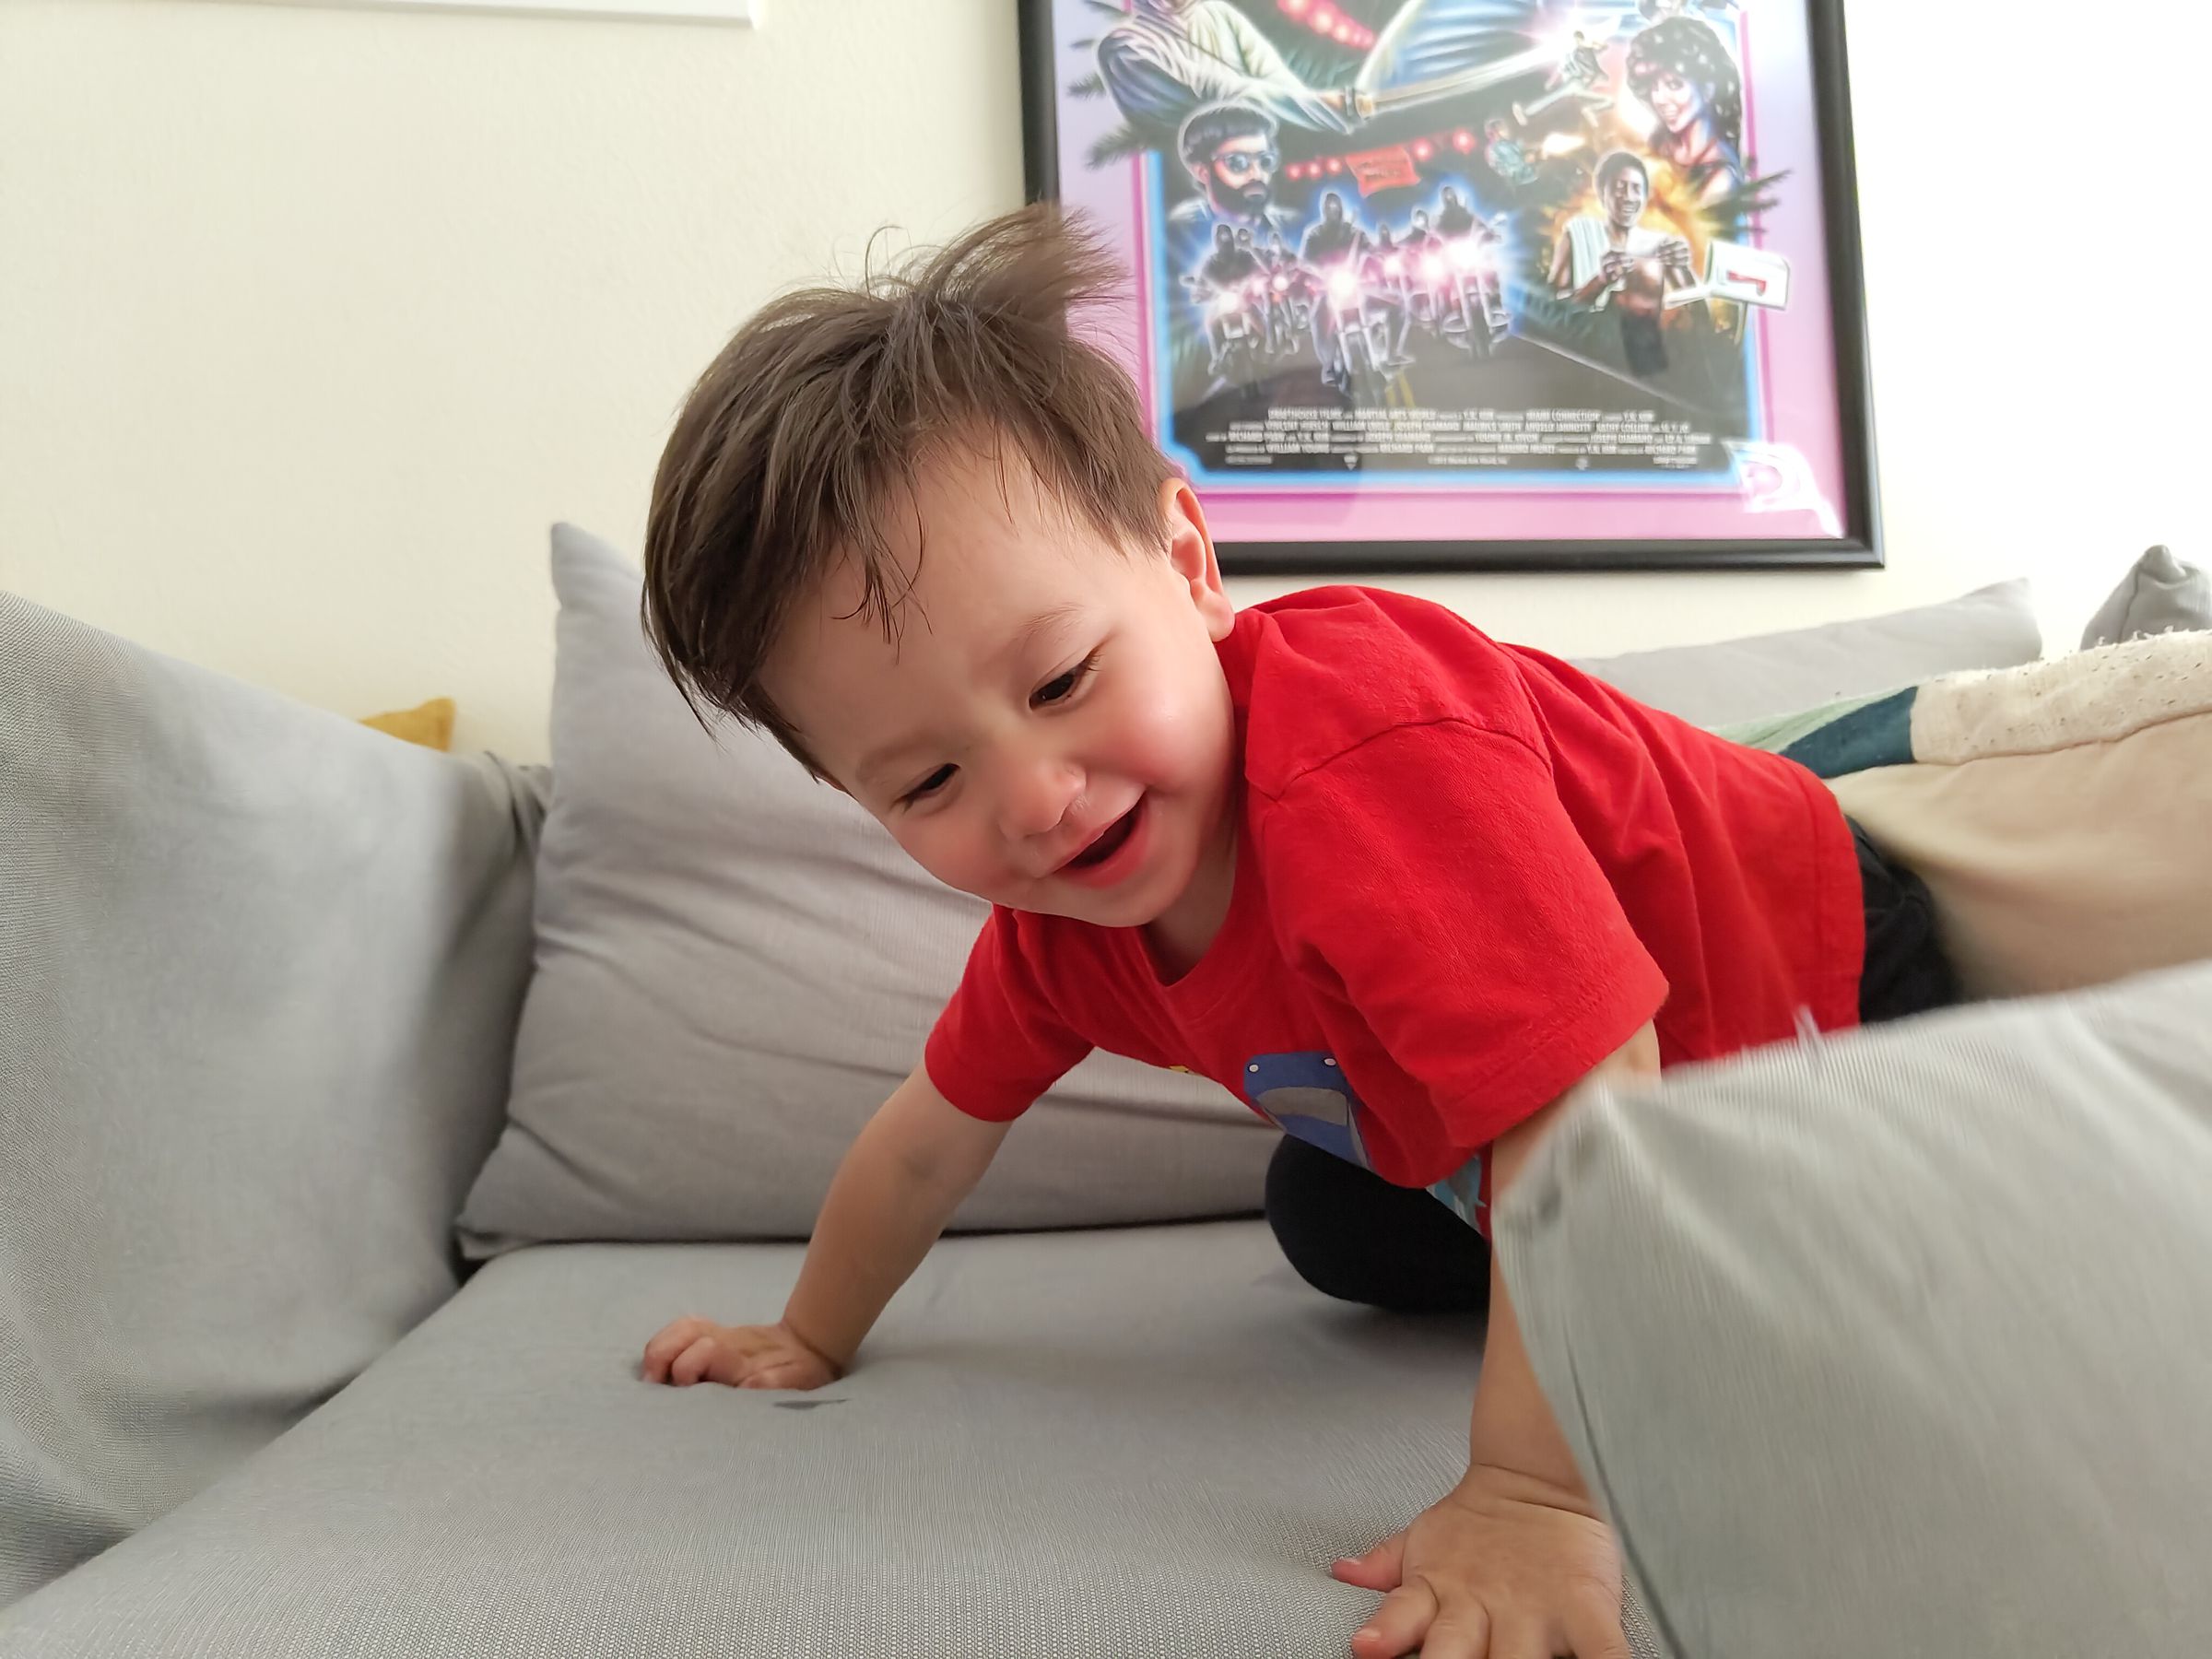 Sample photo of toddler on a couch.